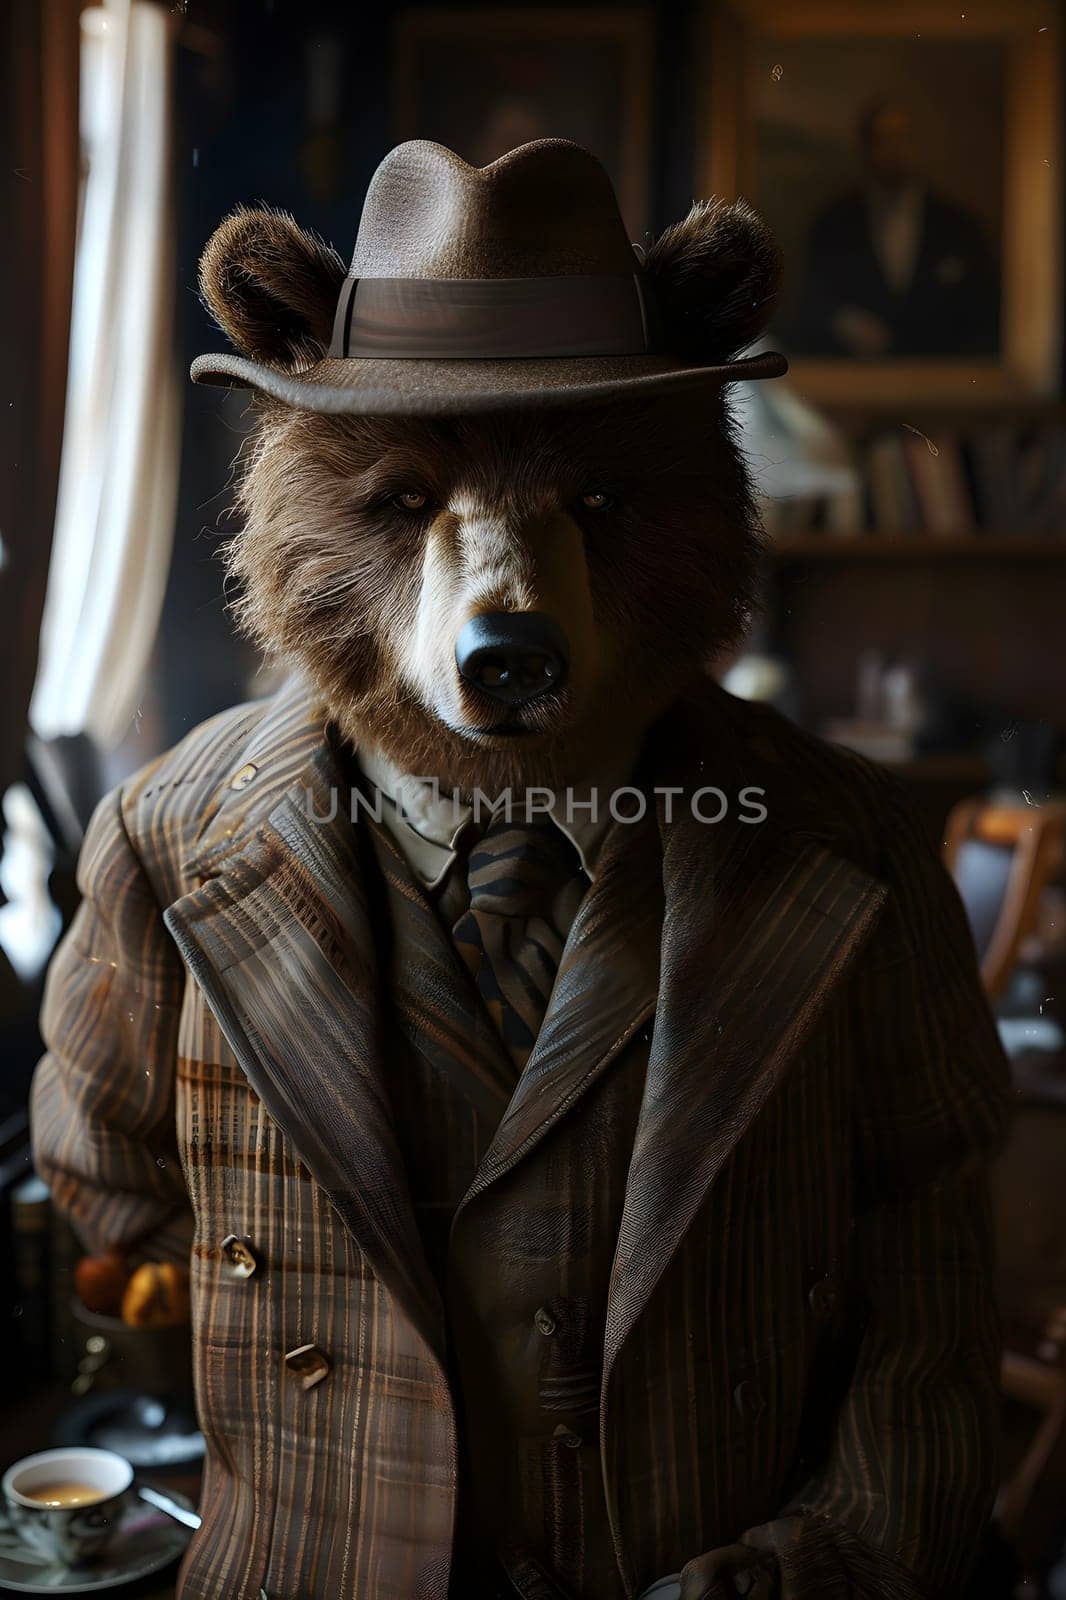 A stuffed bear with a Fedora hat stands in a room, a unique art piece by Nadtochiy